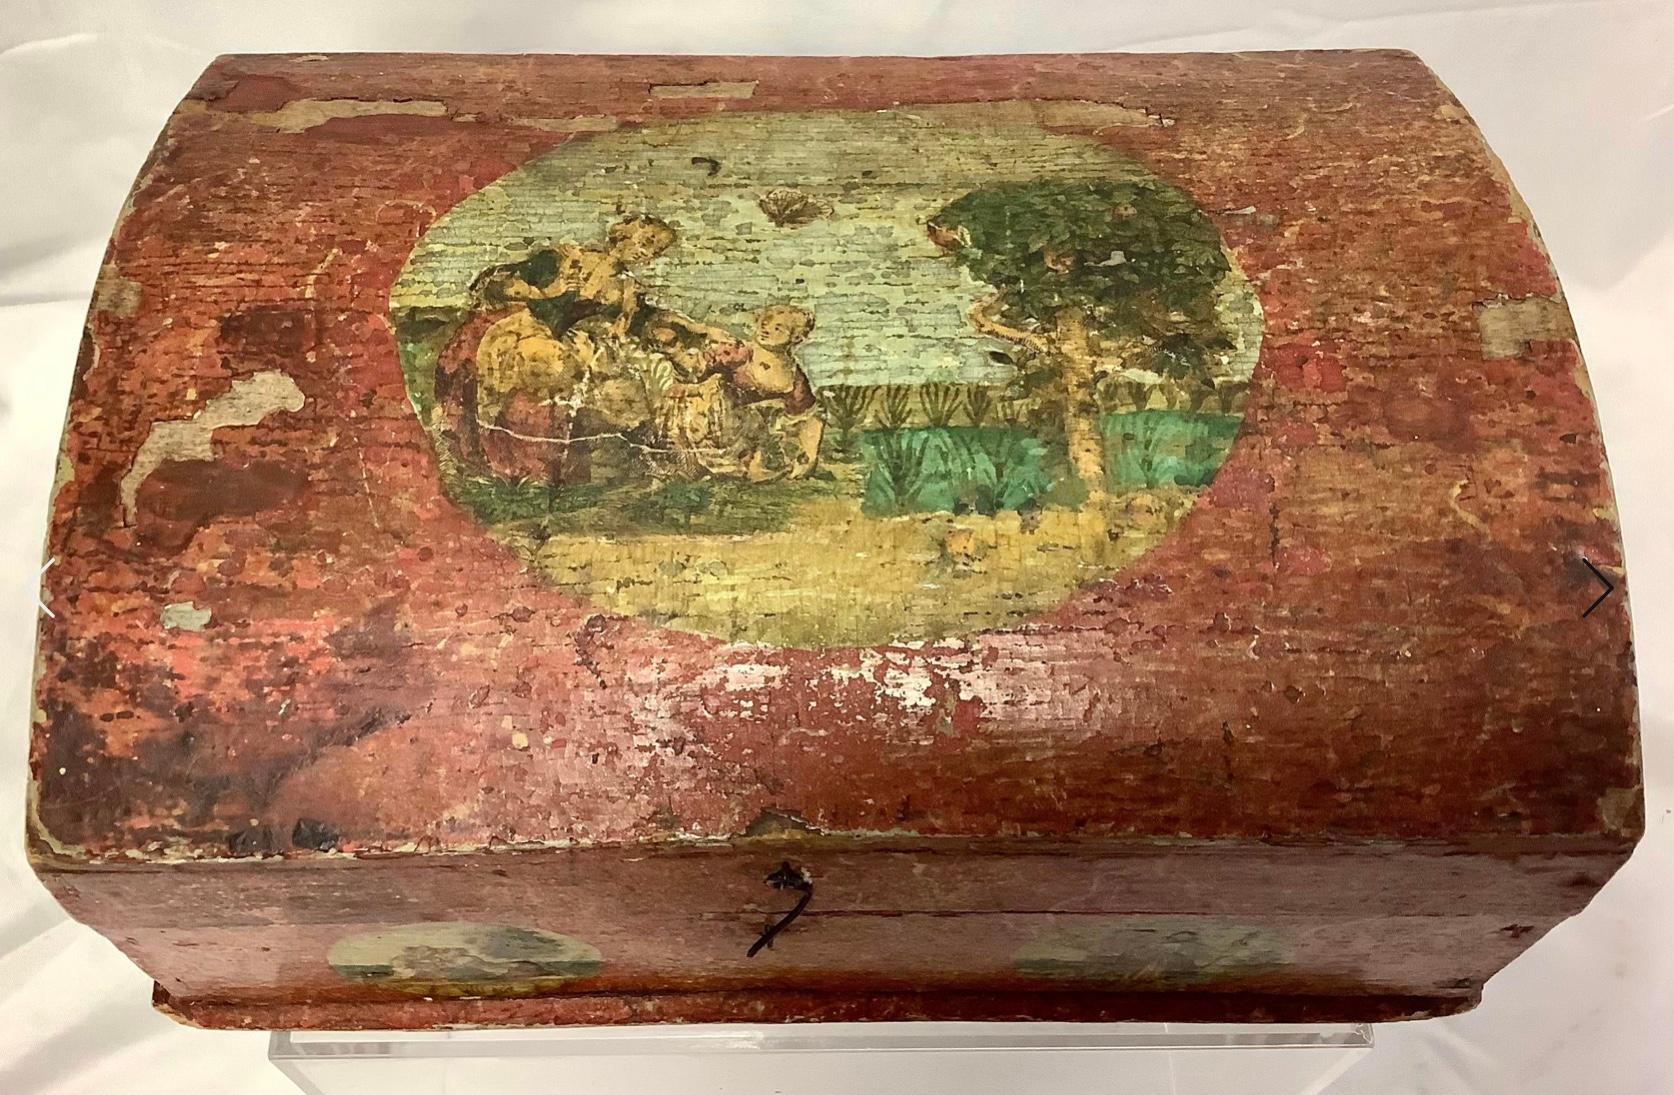 19th Century antique domed painted Italian decoupage chest/box. Outdoor scenes with characters throughout on red background.